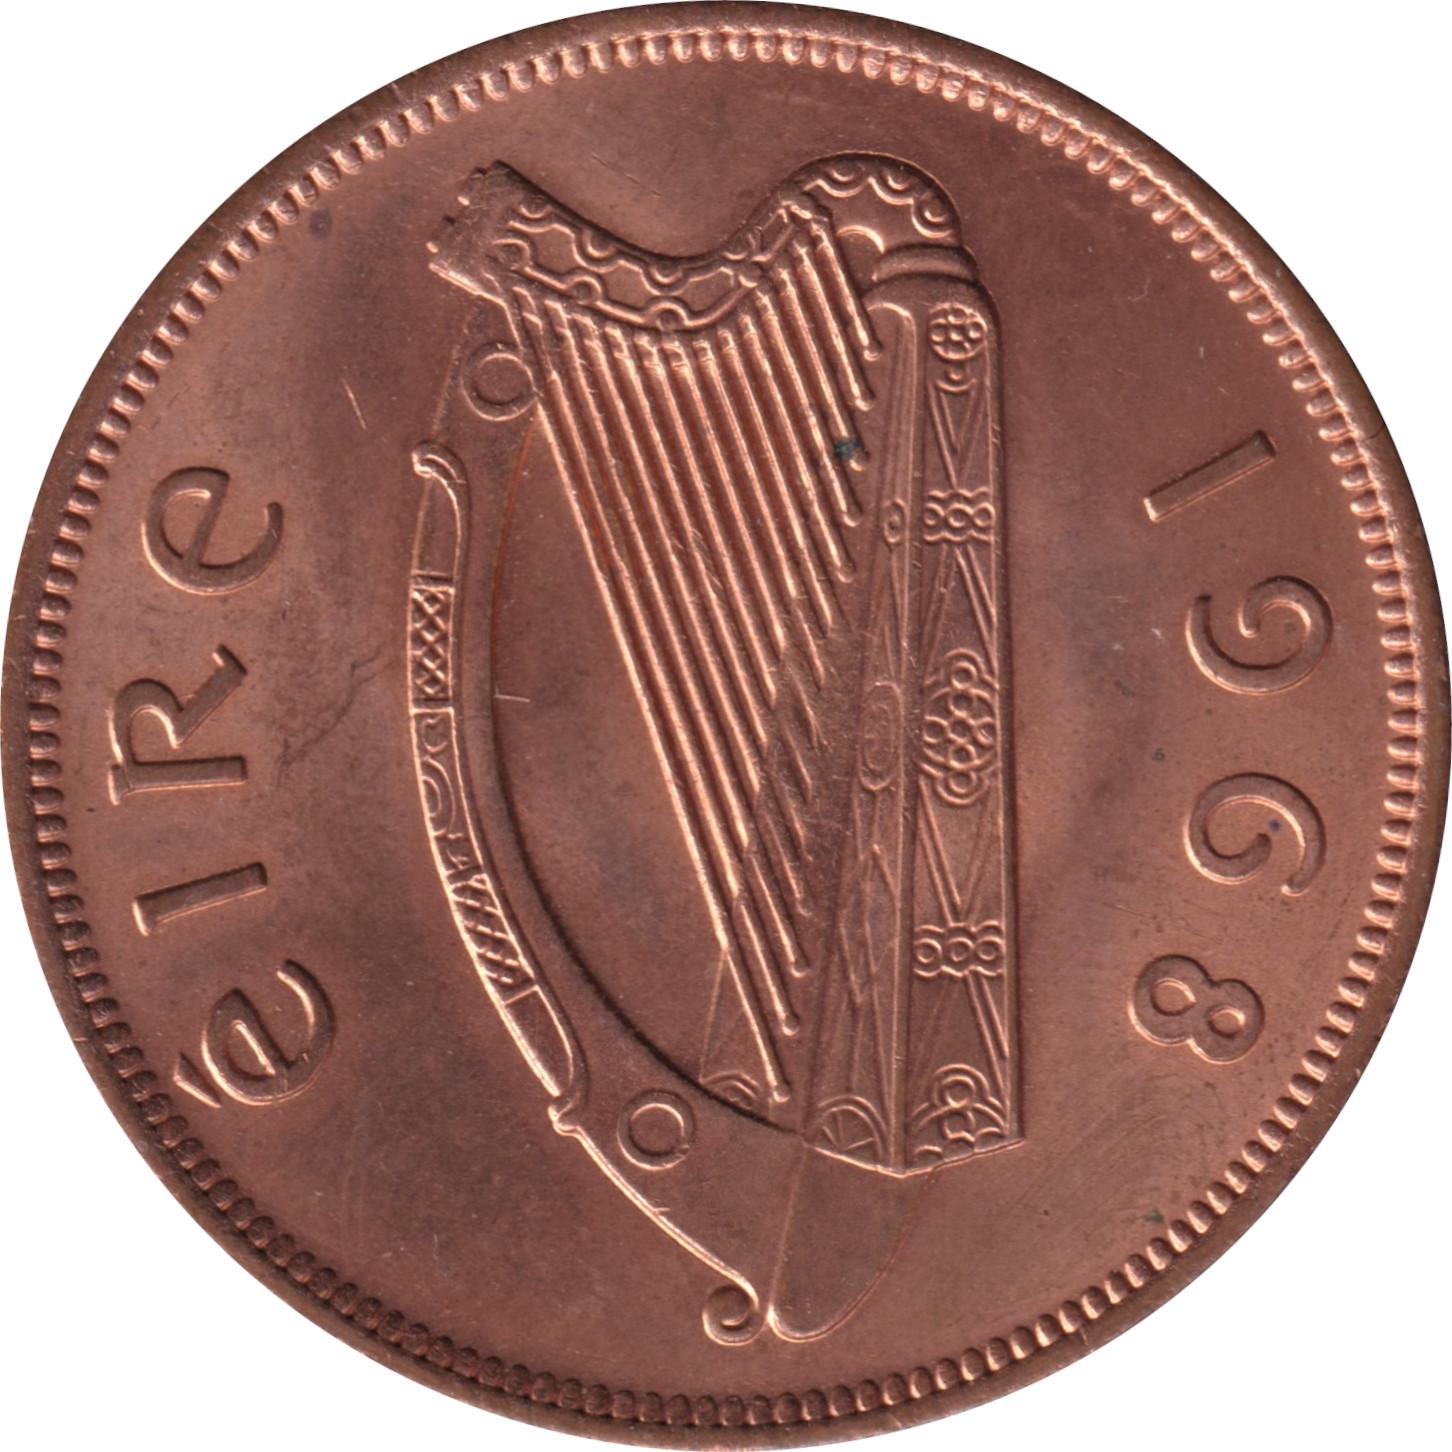 1 penny - EIRE